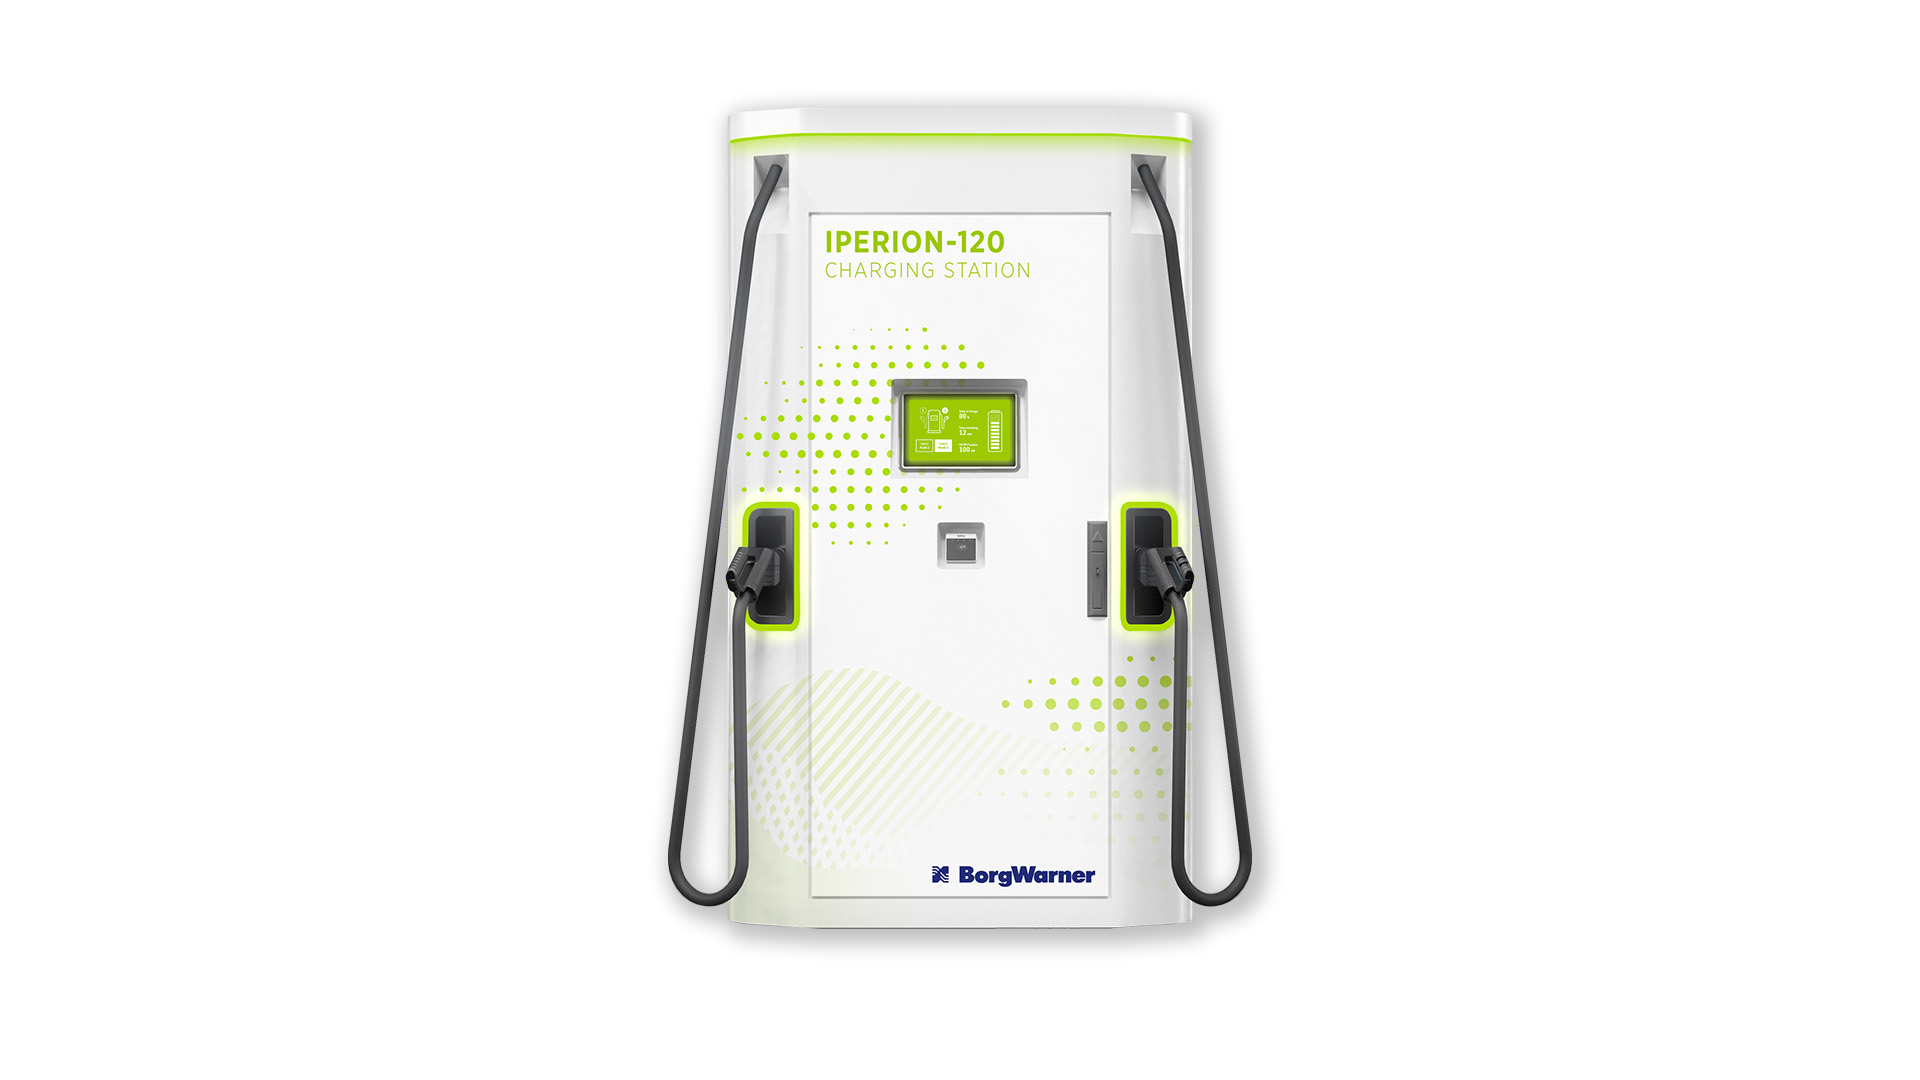 Electric vehicle charging station with two plugs, mostly white with lime green accents